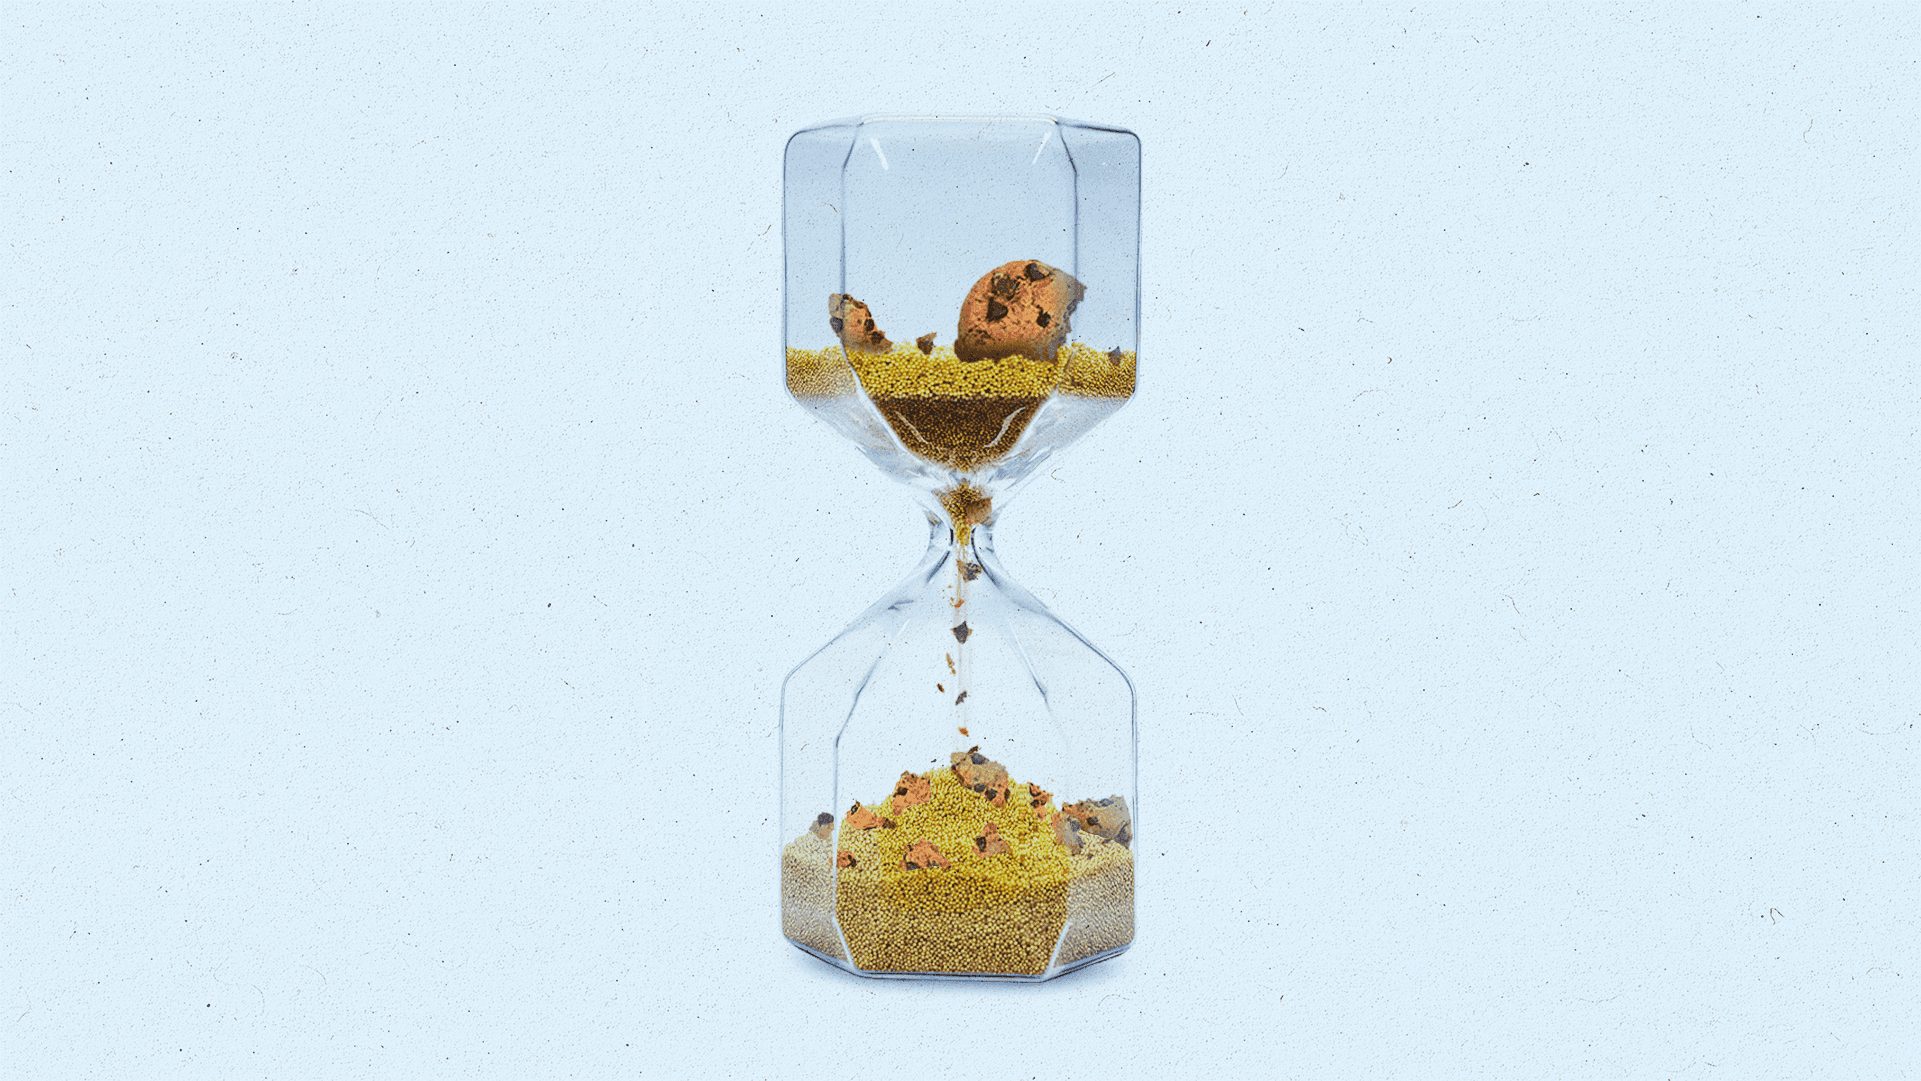 An hourglass running out of time with cookie pieces and crumbs mixed into the sand.